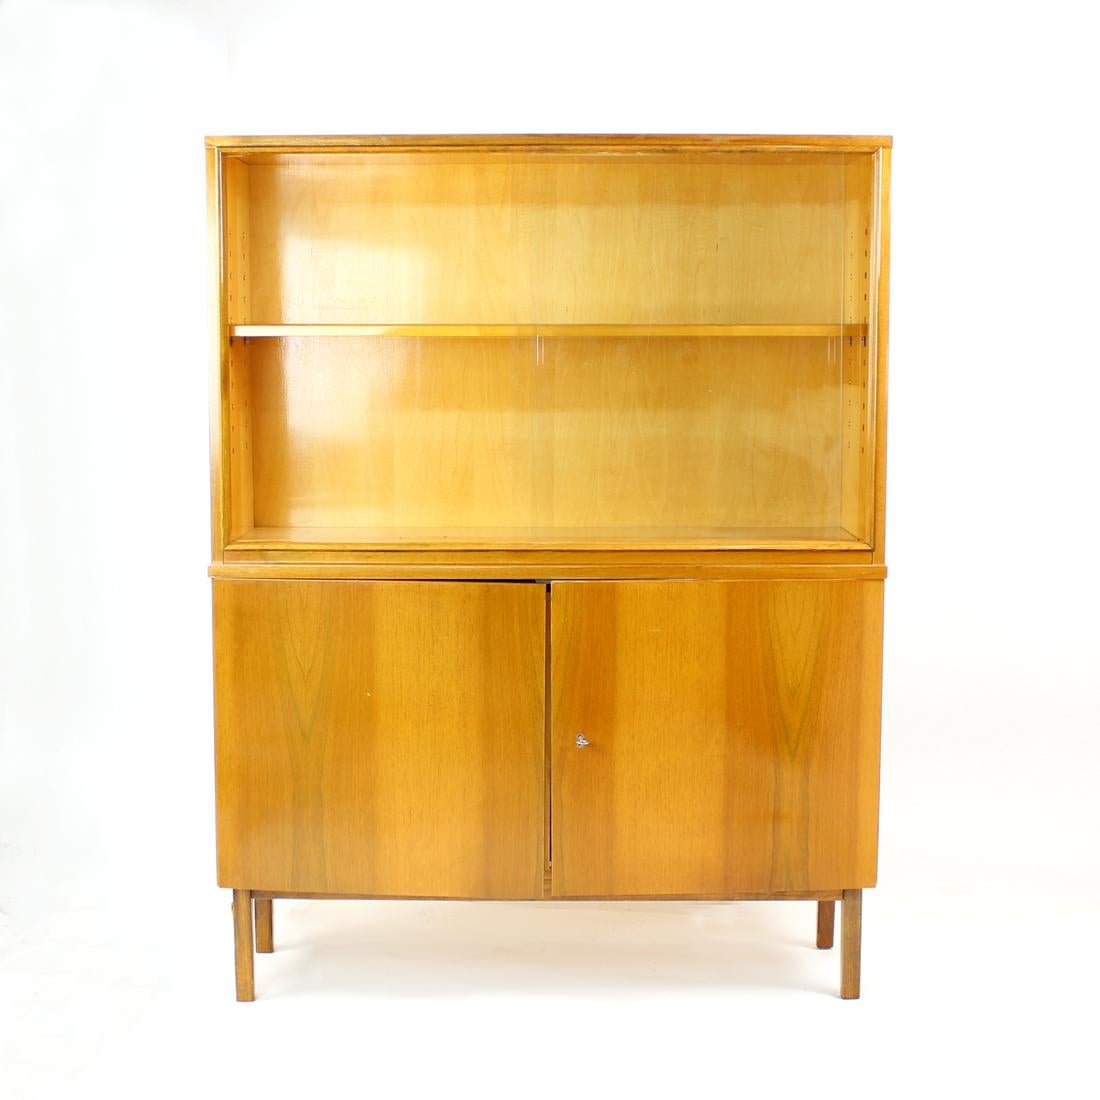 Beautiful 1960s walnut cabinet, or high sideboard. Produced in Czechoslovakia by Jitona. Made in a combination of oak wood on some parts and walnut veneer on the rest. Beautiful veneer and wood finishes. The top part has sliding glass doors,